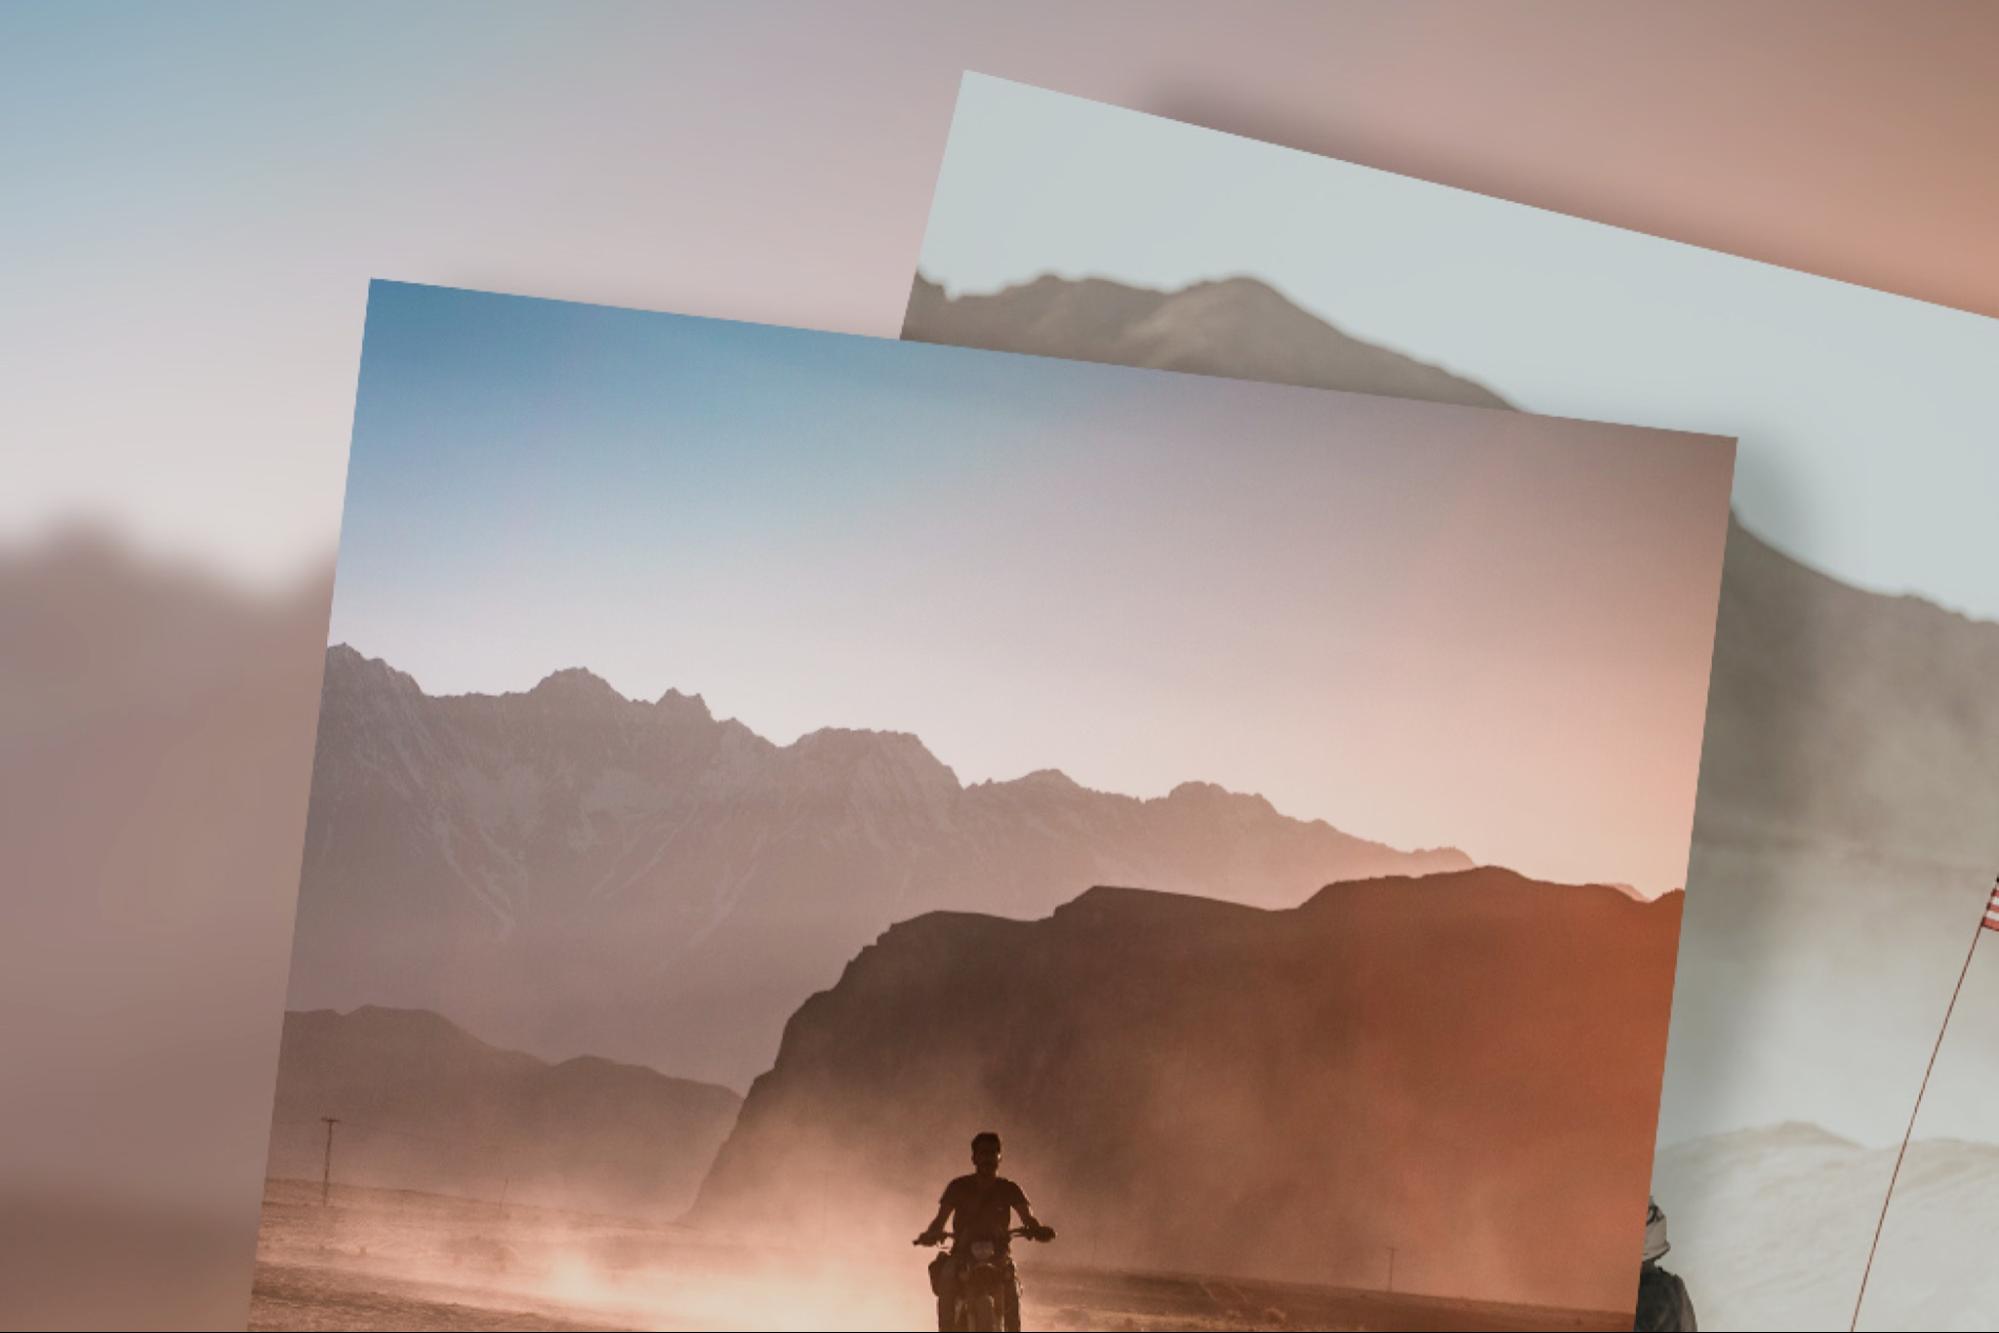 Stacked photographs of the outdoors. The top photo of the stack is a person riding a motorcycle through the desert, facing the camera. Photos by Adeel Shabir, Bradley Dunn.